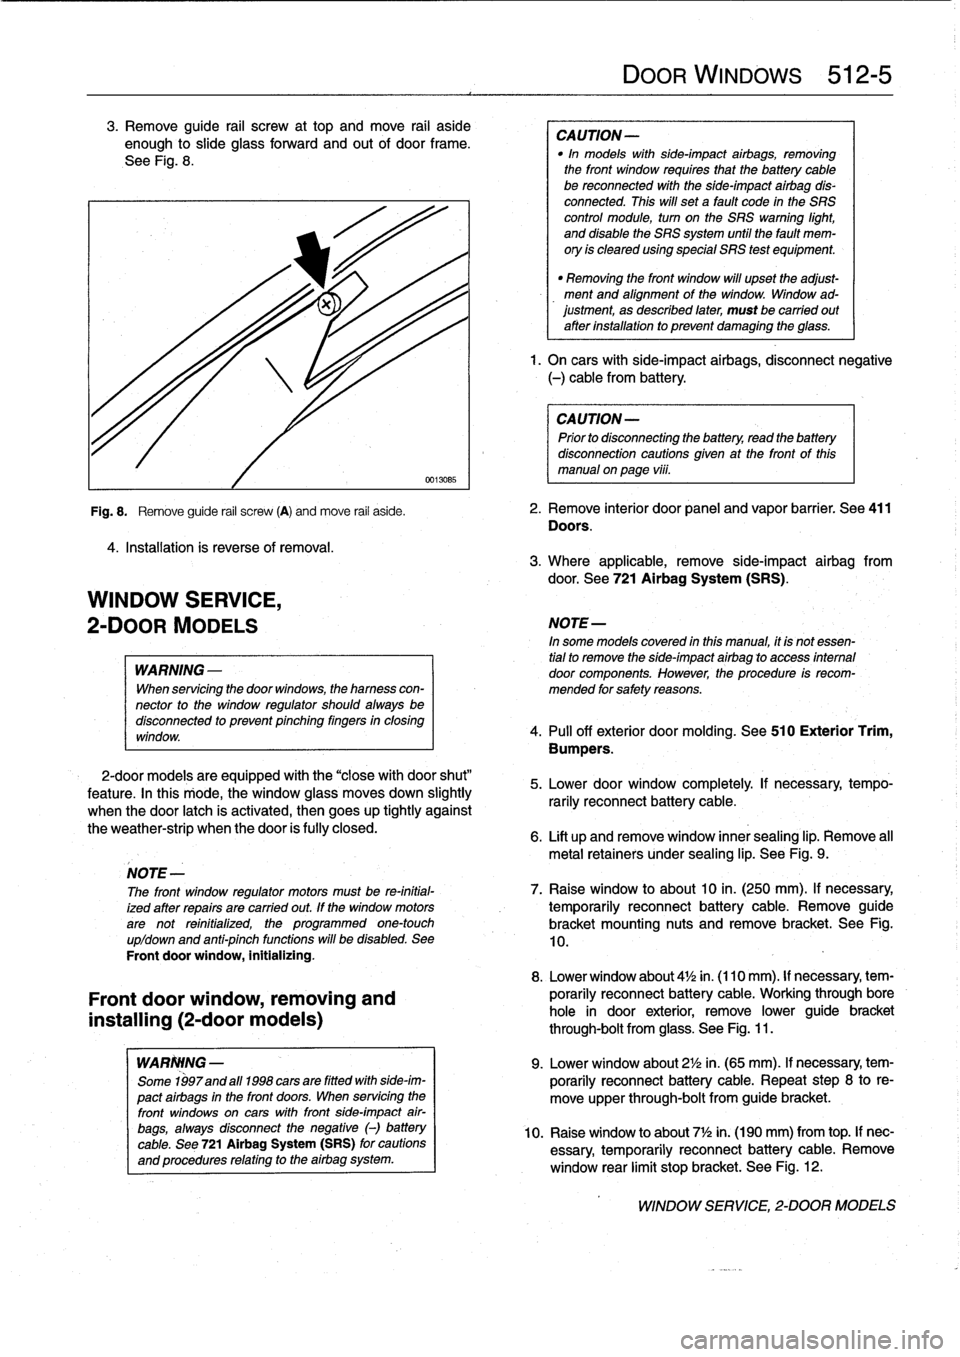 BMW 328i 1994 E36 User Guide 
3
.
Remove
guide
rail
screw
at
top
and
move
rail
aside
enough
to
slide
glass
forward
and
out
of
door
frame
.

See
Fig
.
8
.

4
.
Installation
is
reverse
of
removal
.

WINDOW
SERVICE,

2-DOOR
MODELS

